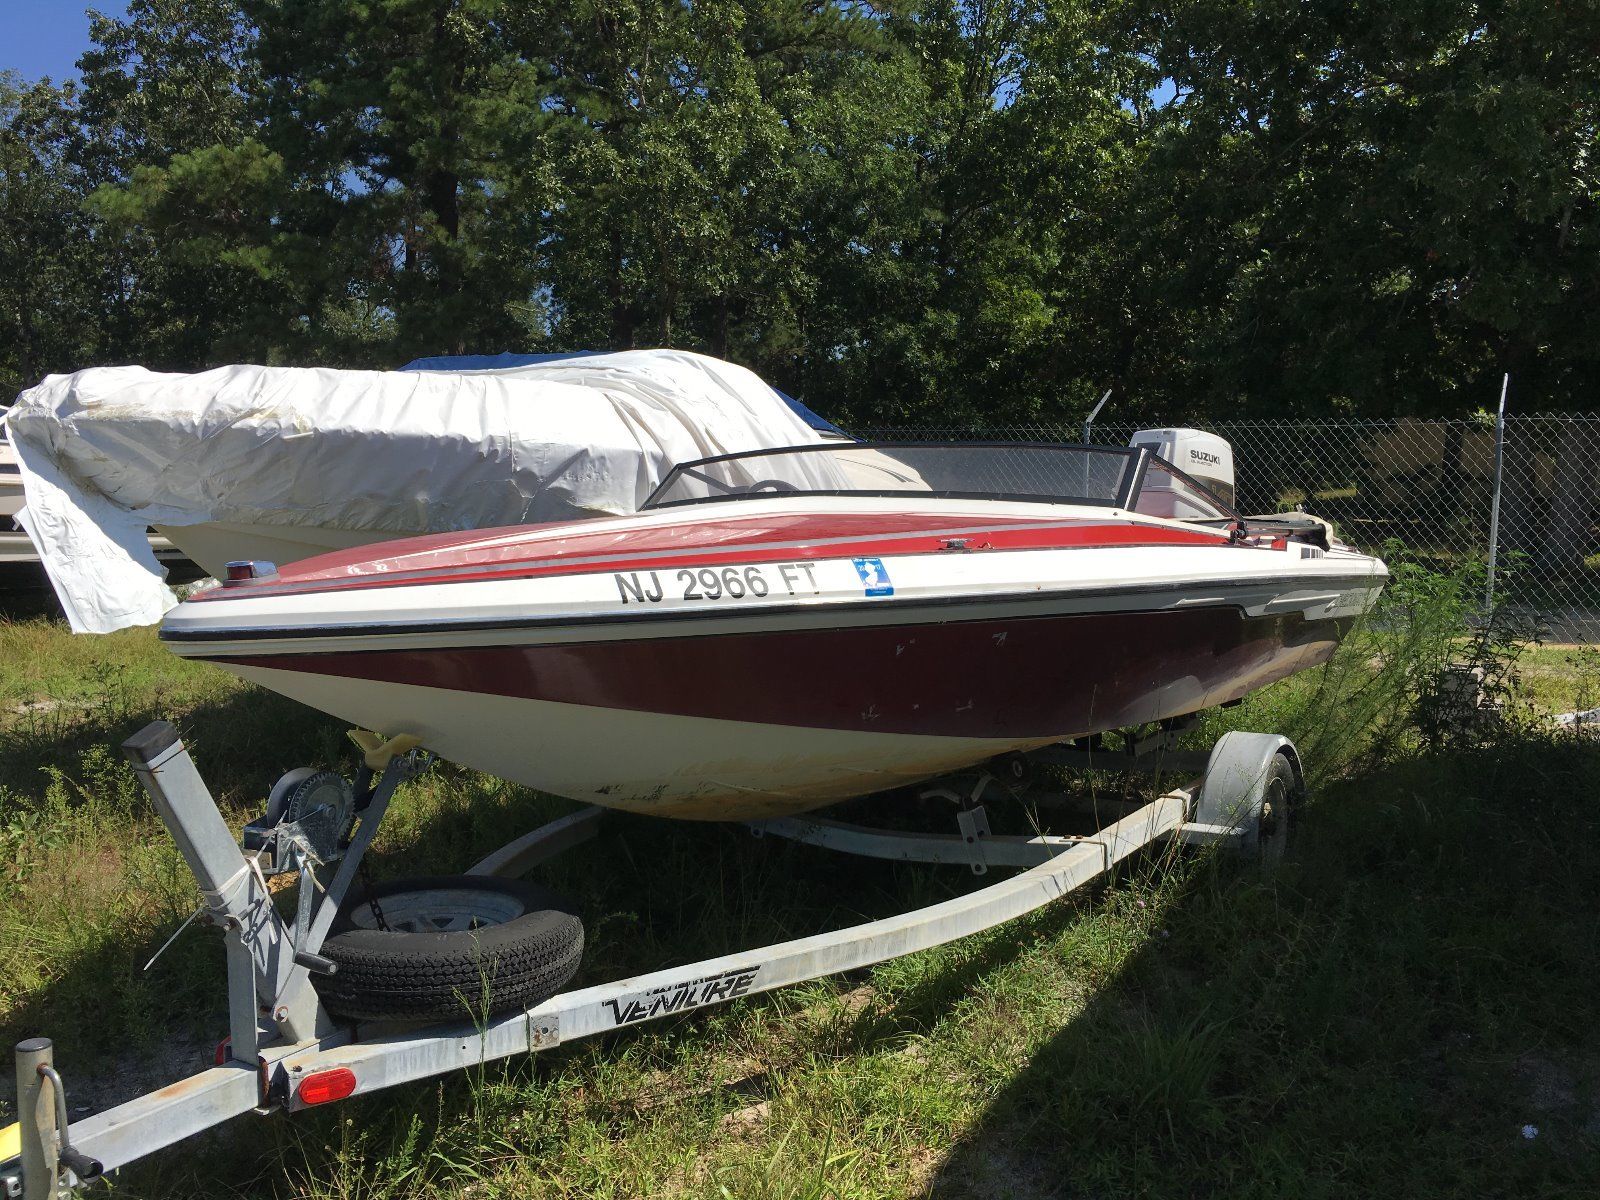 Checkmate 1988 for sale for $1 - Boats-from-USA.com